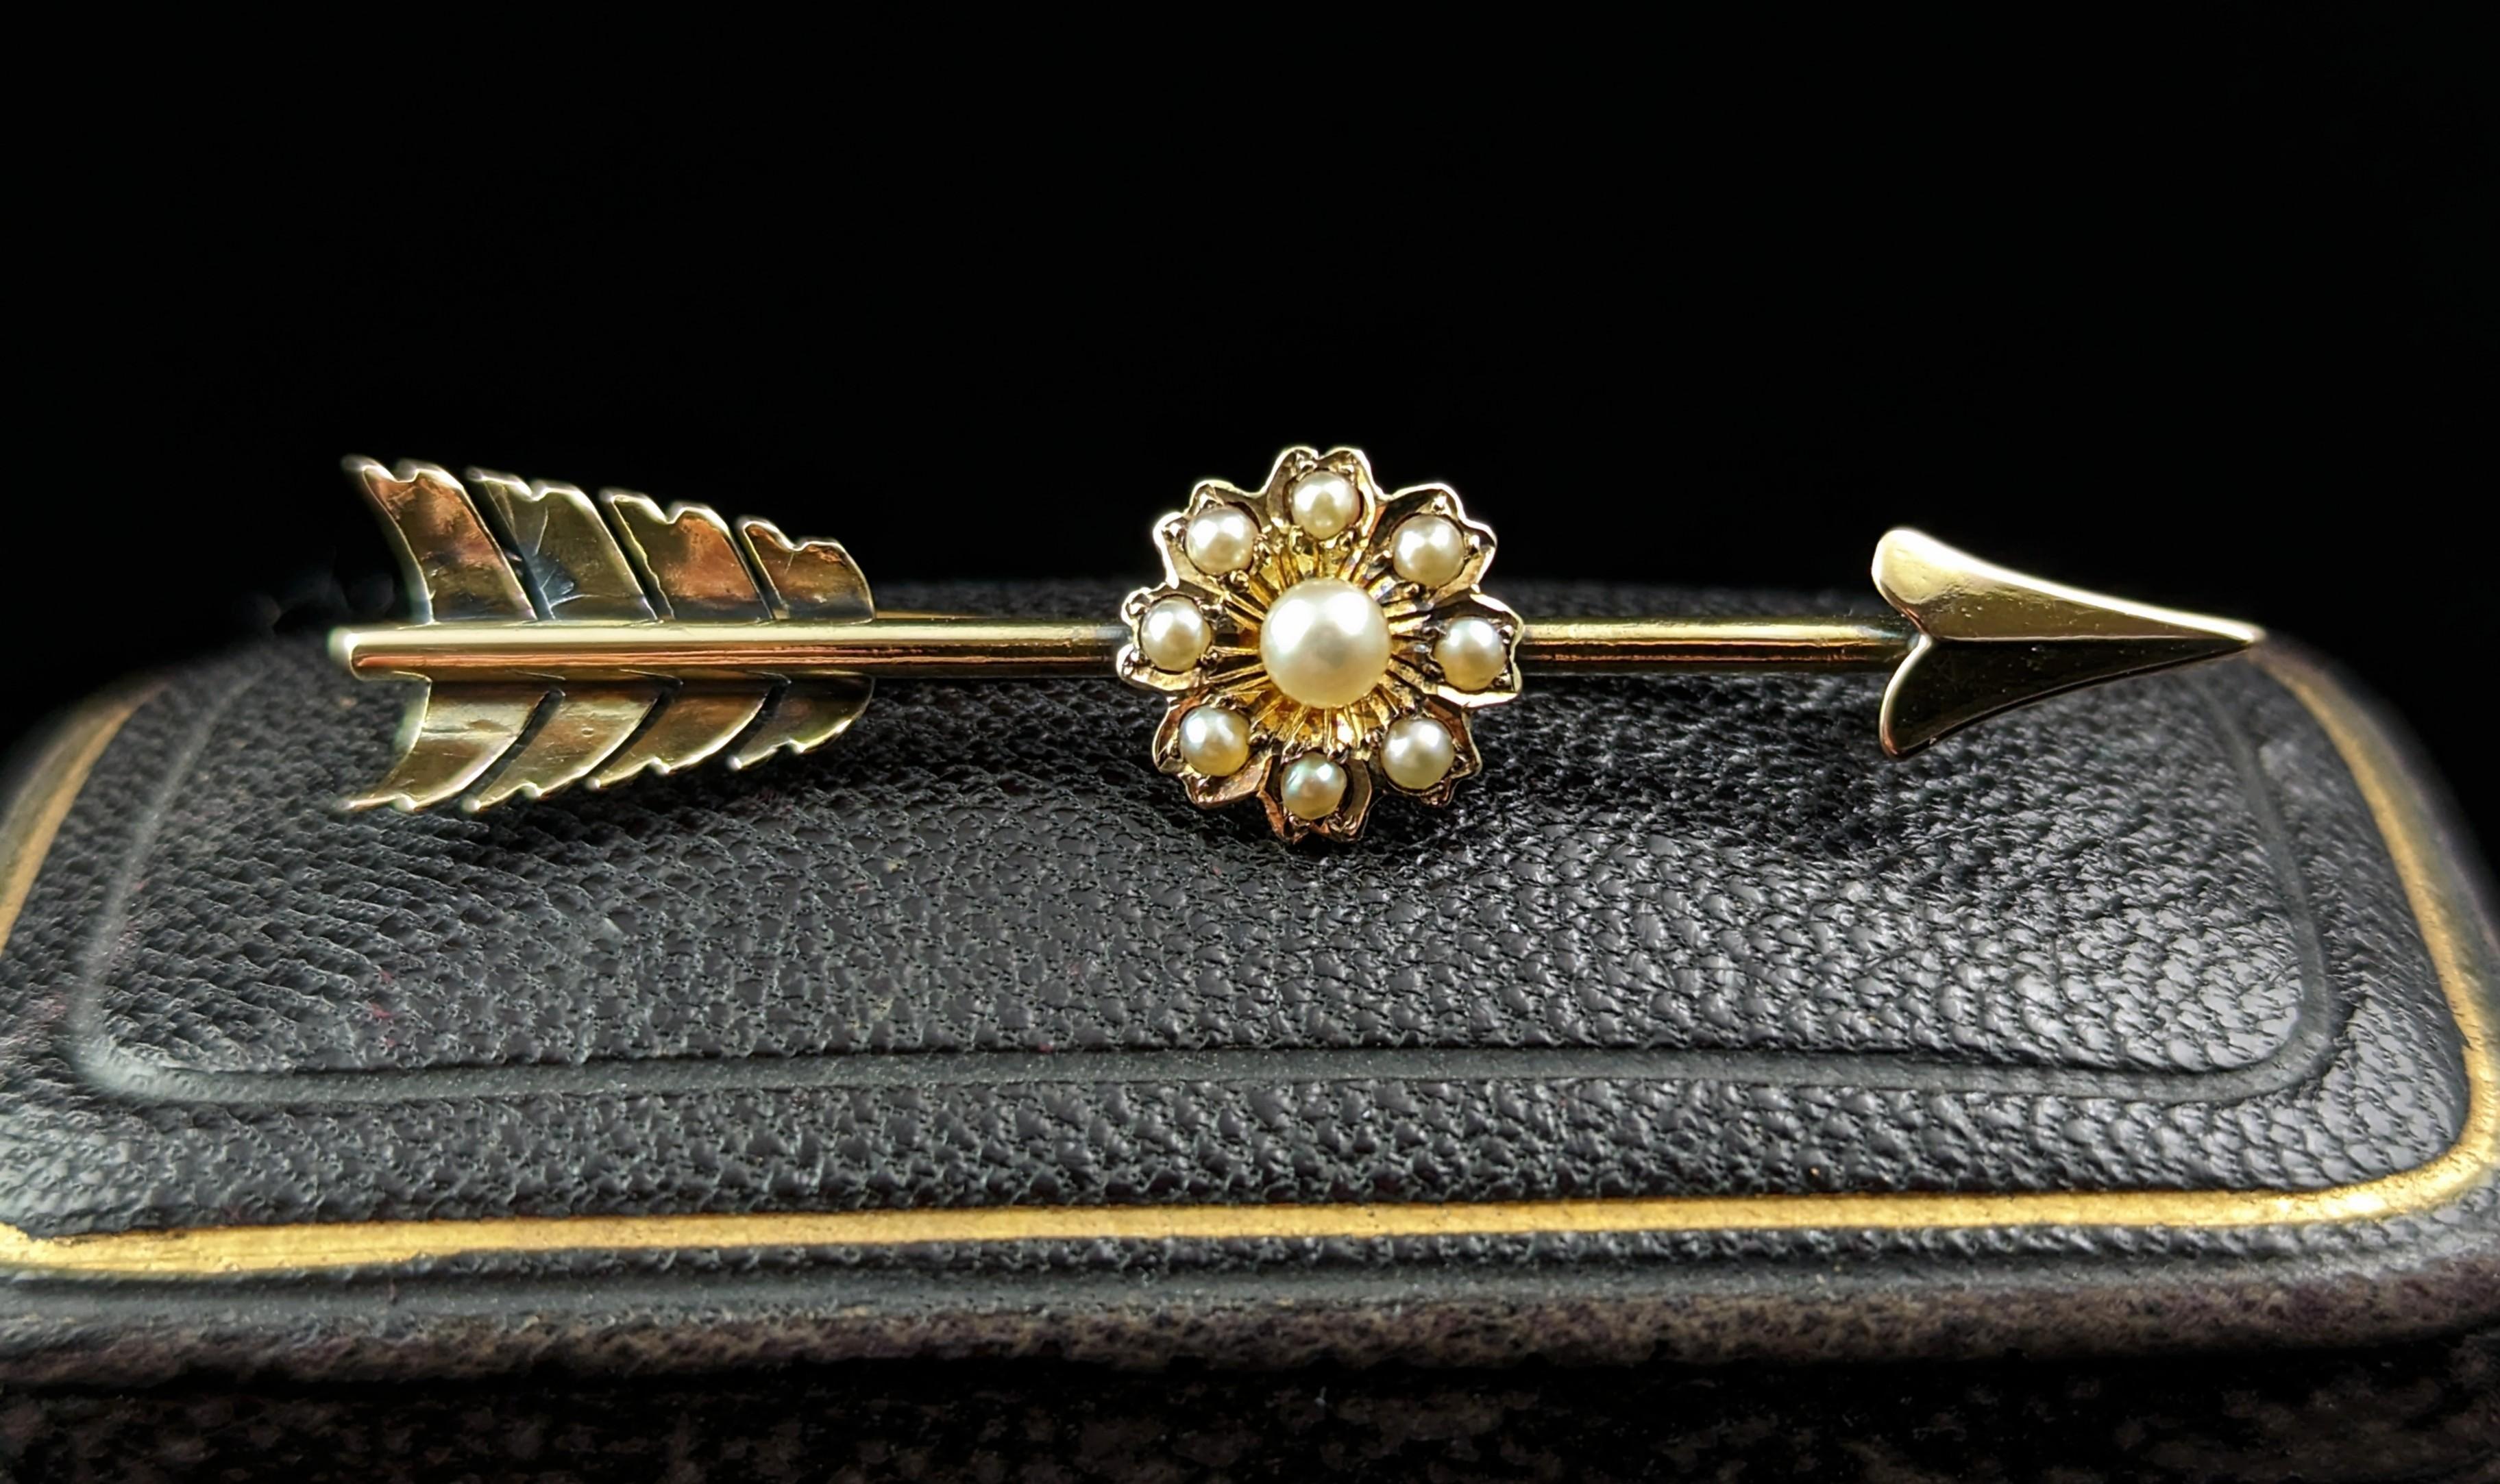 This beautiful antique 9ct gold Arrow and flower brooch is a real charmer! Rich in both symbolism and style you can't go wrong.

A slender feathered arrow with the rich buttery gold hue only found on antique gold, it has a slightly brushed finish